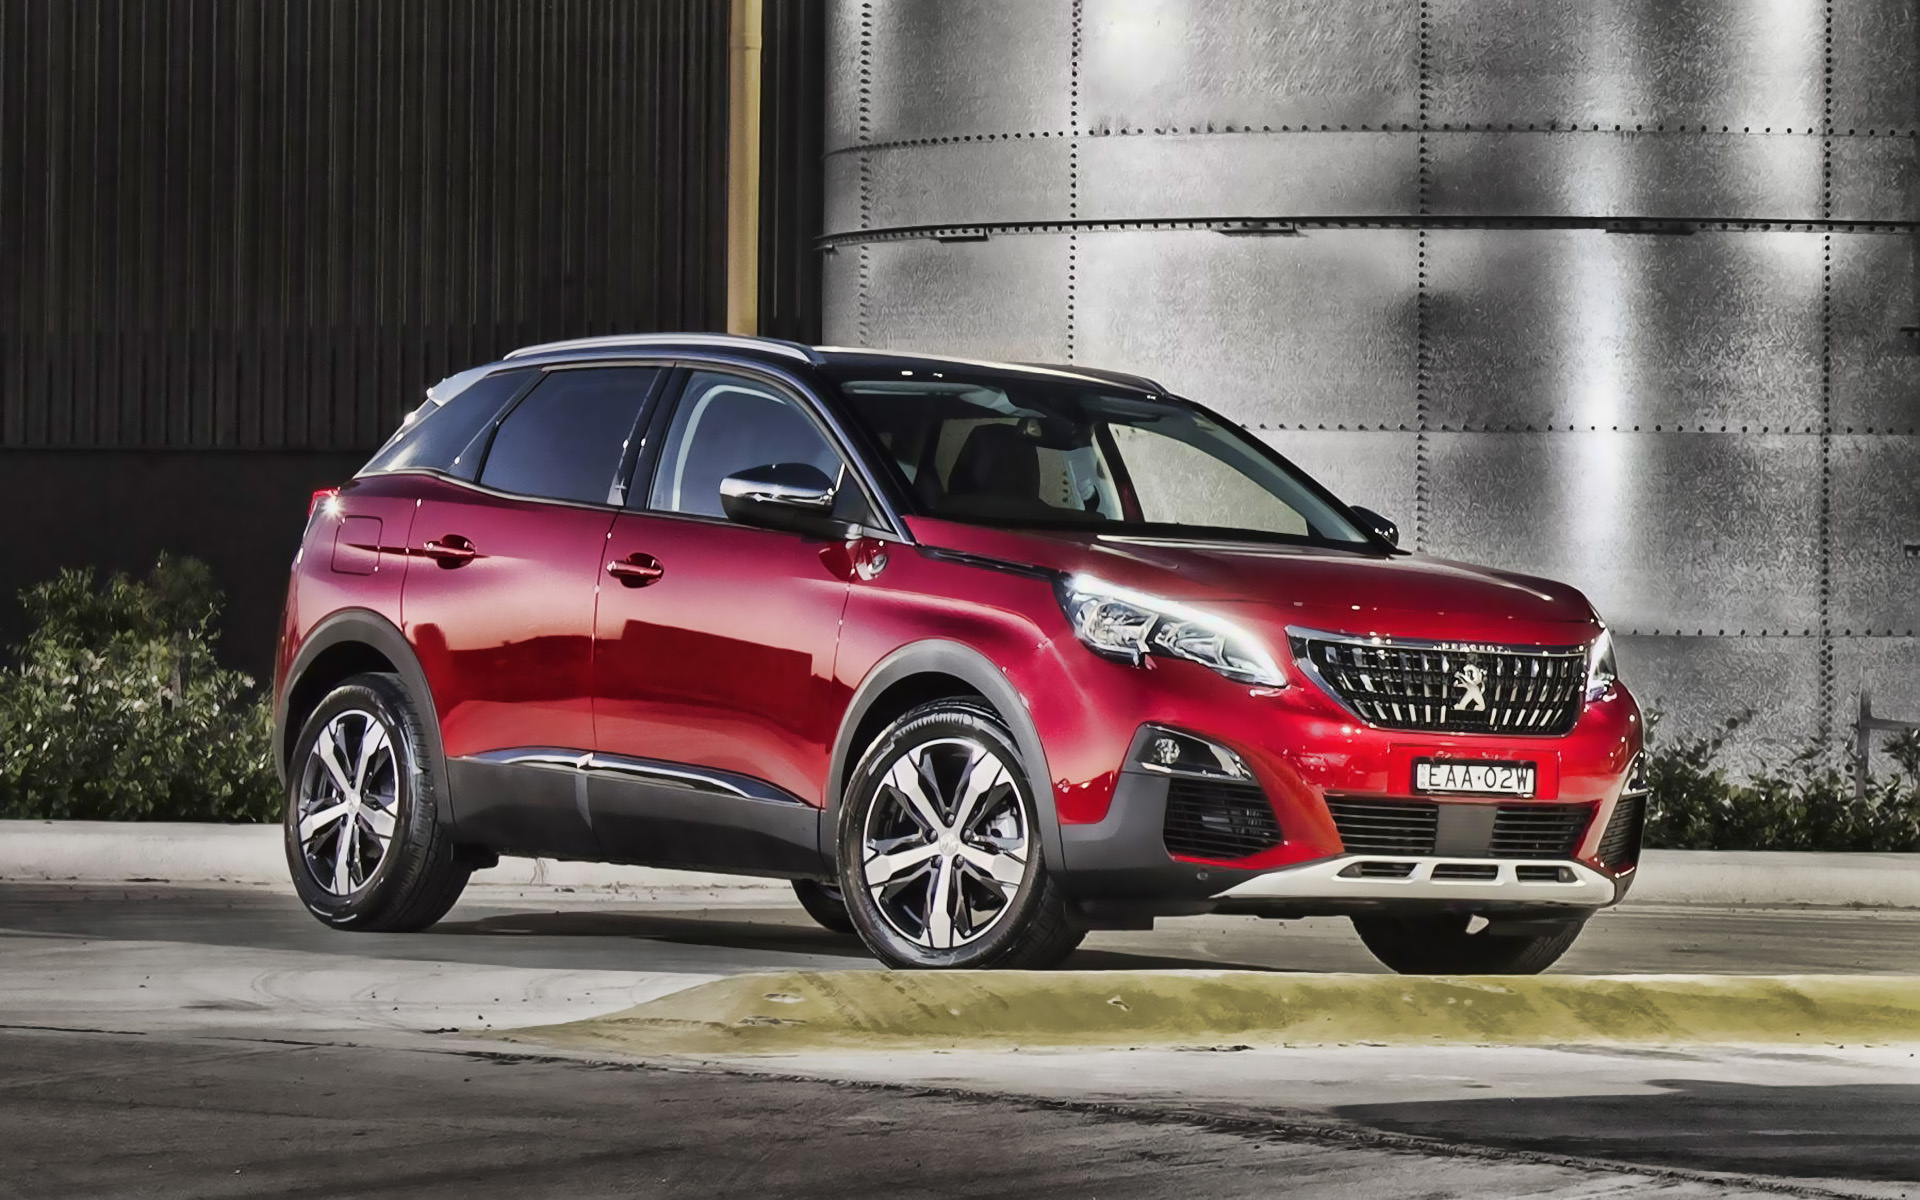 Peugeot 3008 Crossway, 2019 cars, French crossovers, High-quality HD pictures, 1920x1200 HD Desktop